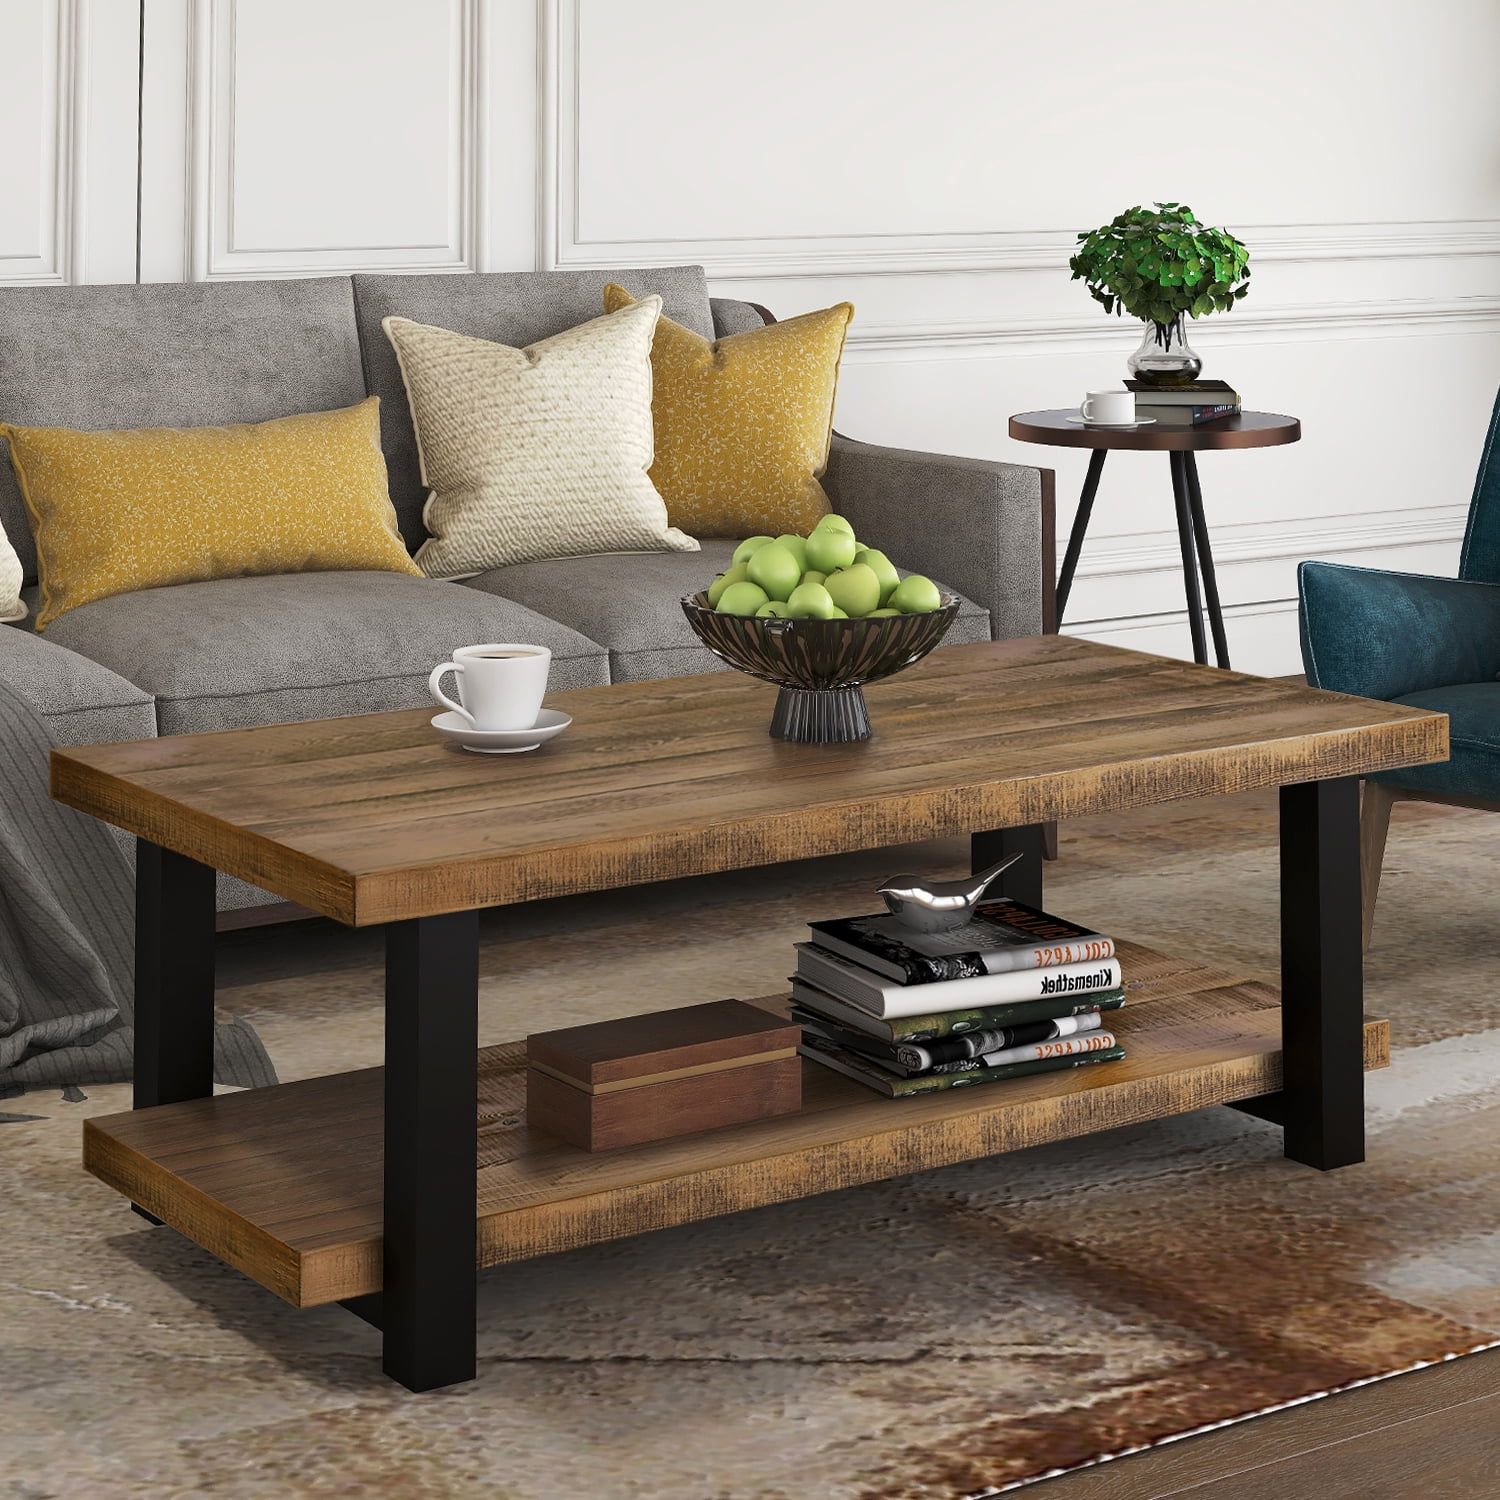 Topcobe Rustic Natural Coffee Table With Storage Shelf, Side End Table Within Rectangular Coffee Tables With Pedestal Bases (Gallery 2 of 20)